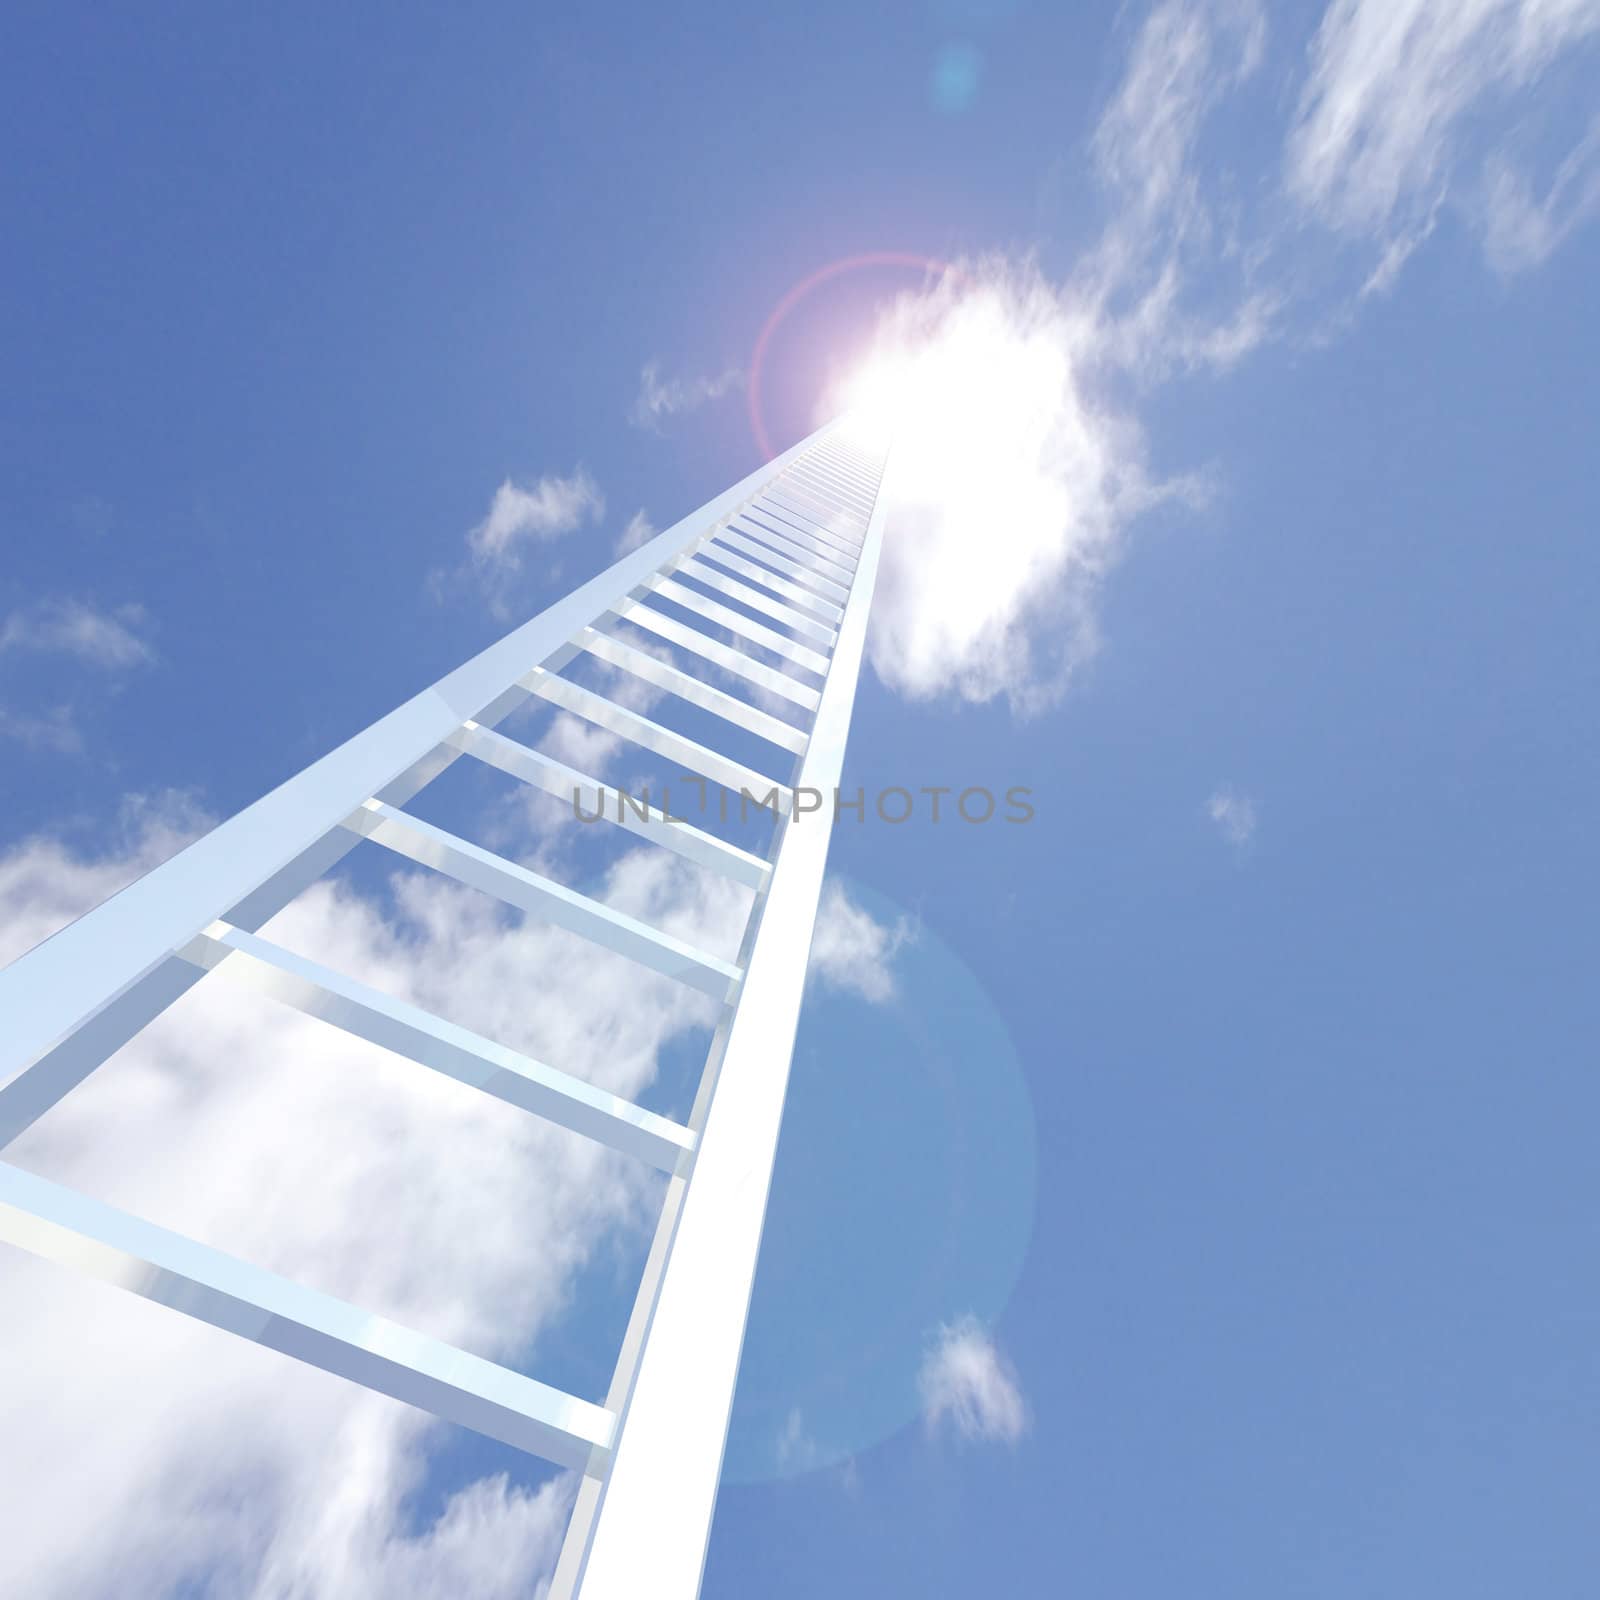 Image of a ladder reaching up to the sky.